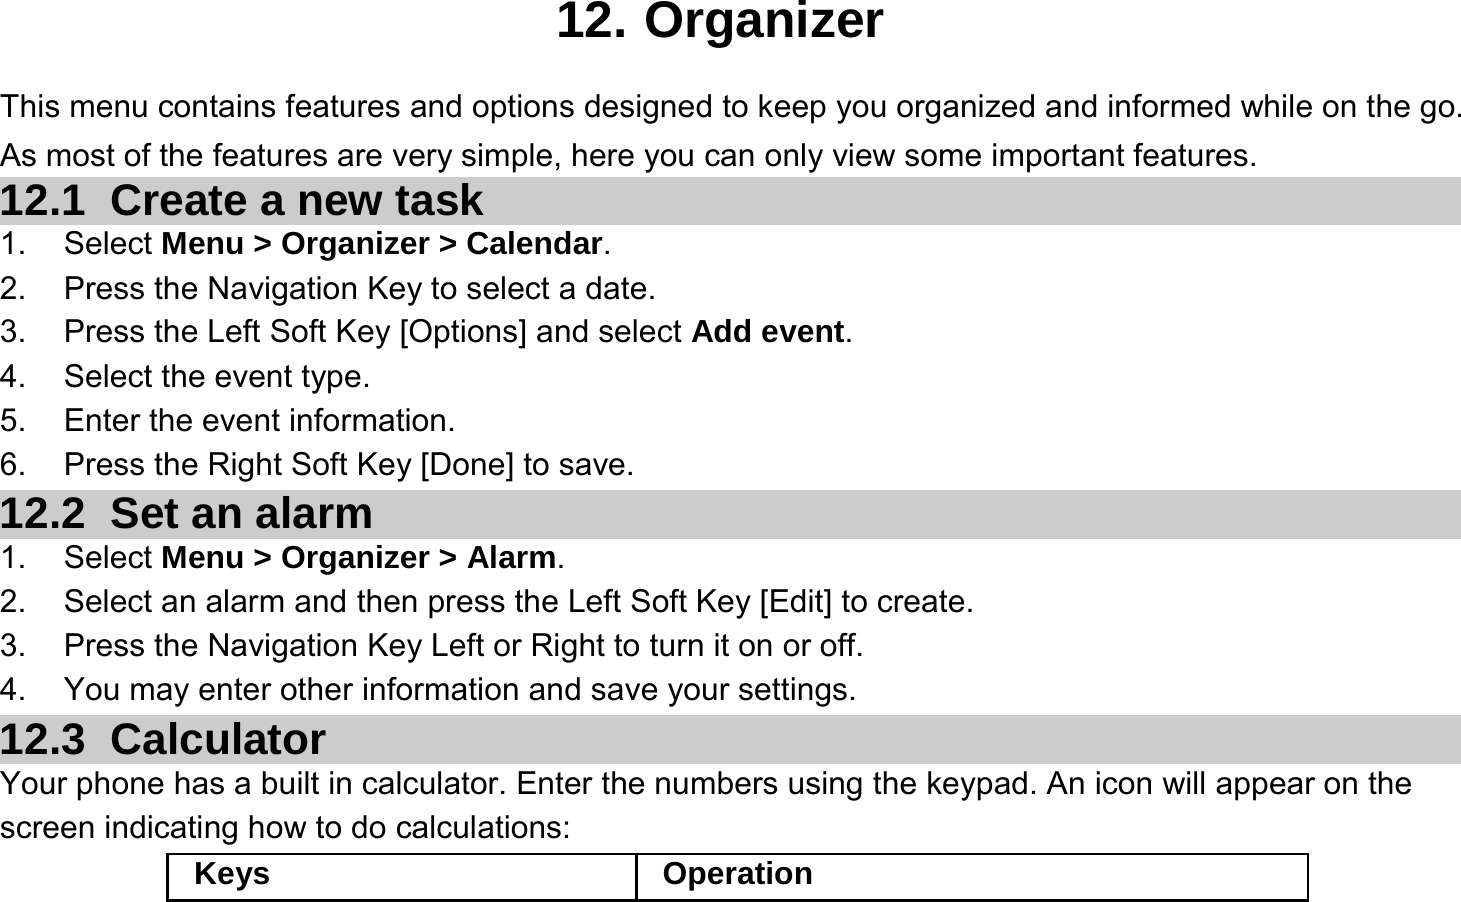  12. Organizer This menu contains features and options designed to keep you organized and informed while on the go. As most of the features are very simple, here you can only view some important features. 12.1   Create a new task 1. Select Menu &gt; Organizer &gt; Calendar. 2.  Press the Navigation Key to select a date. 3.  Press the Left Soft Key [Options] and select Add event. 4.  Select the event type. 5.  Enter the event information. 6.  Press the Right Soft Key [Done] to save. 12.2   Set an alarm 1. Select Menu &gt; Organizer &gt; Alarm. 2.  Select an alarm and then press the Left Soft Key [Edit] to create. 3.  Press the Navigation Key Left or Right to turn it on or off. 4.  You may enter other information and save your settings. 12.3   Calculator Your phone has a built in calculator. Enter the numbers using the keypad. An icon will appear on the screen indicating how to do calculations: Keys Operation 